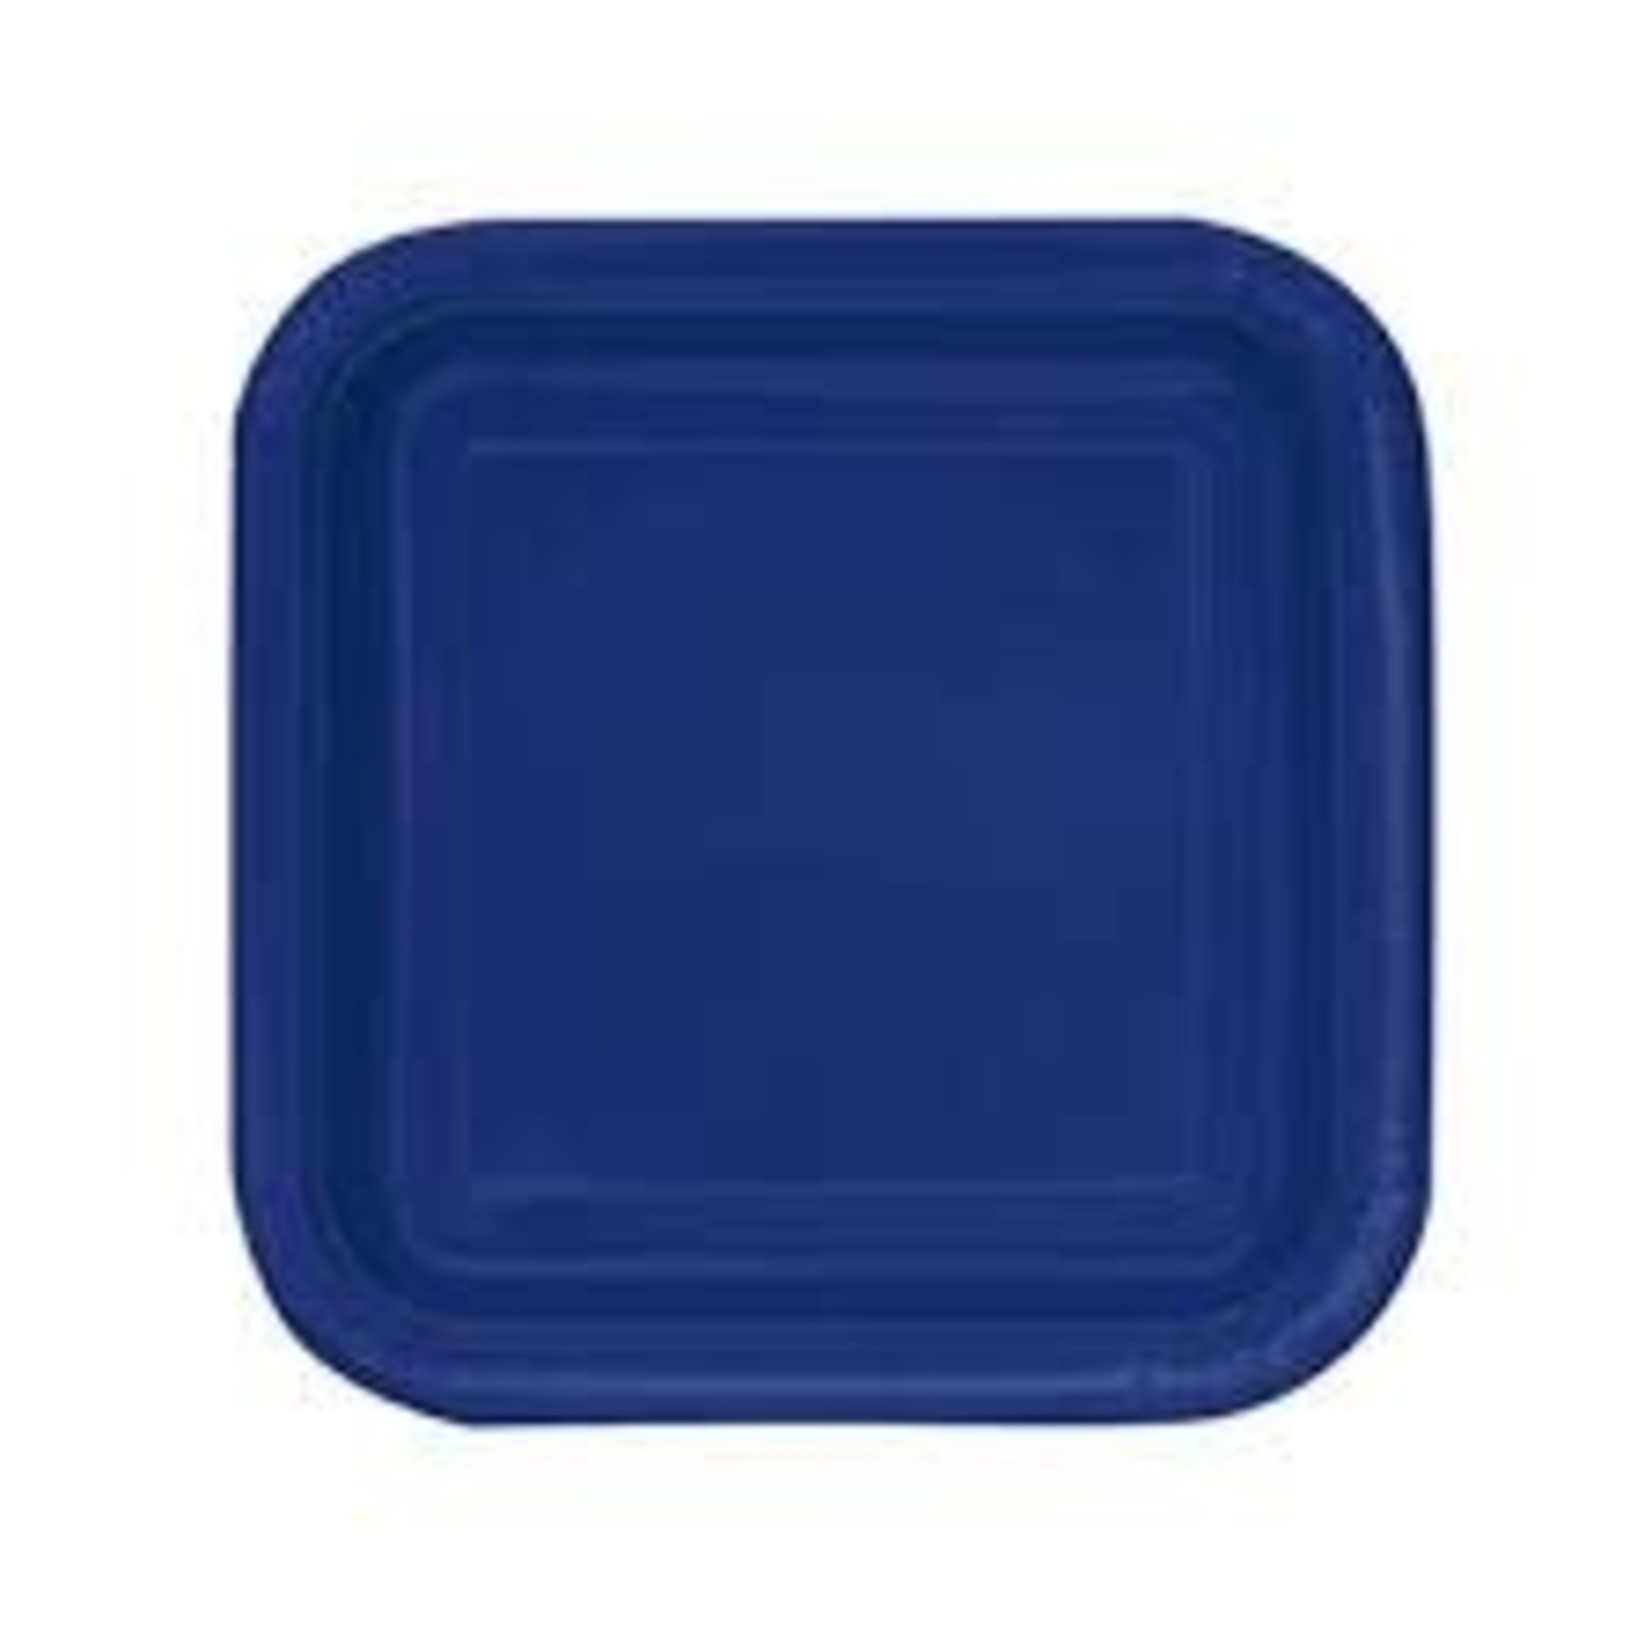 7" Navy Blue Square Plate